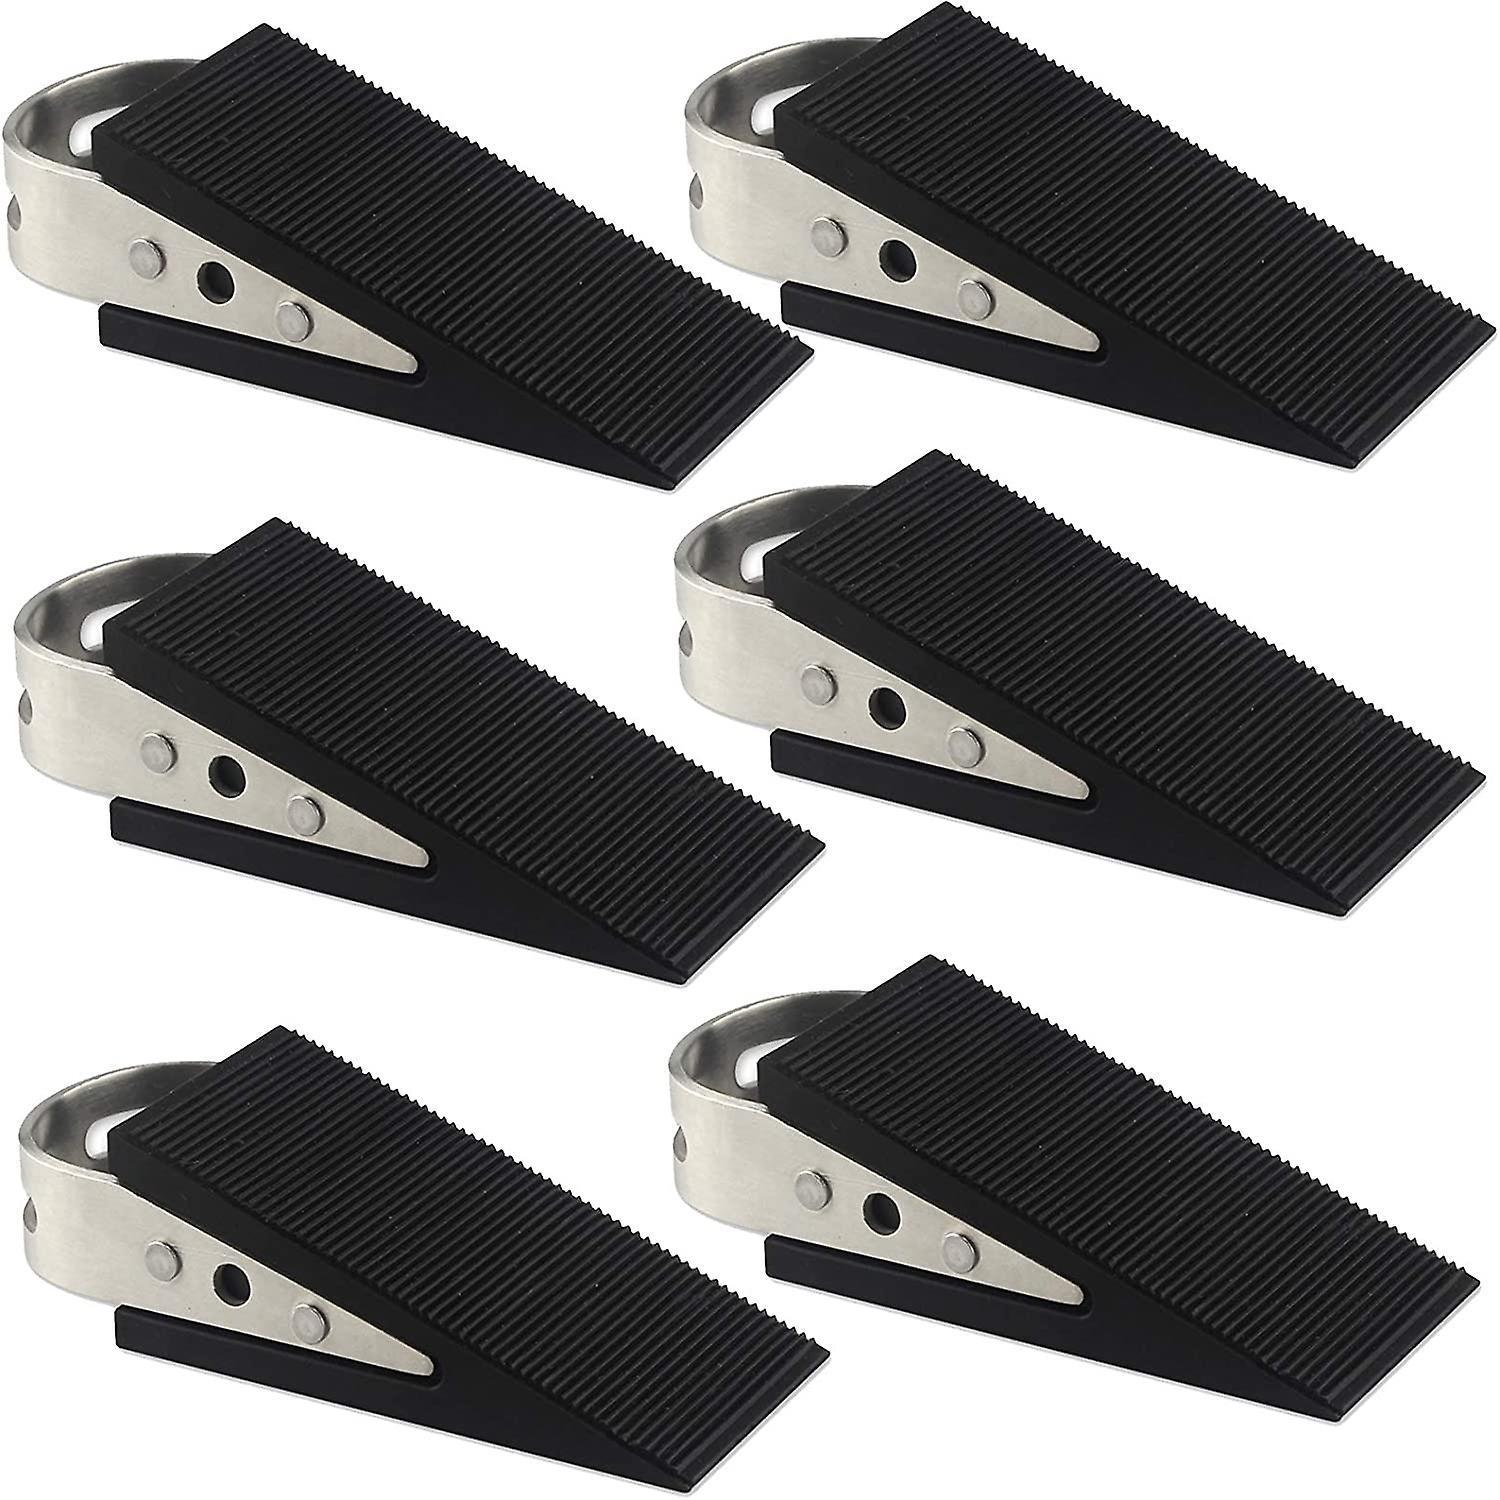 Door Stopper, 6-Piece Heavy Duty Black Wedge, Can Fix The Door Firmly Without Moving, Made Of Rubber And Stainless Steel, Suitable For All Floors